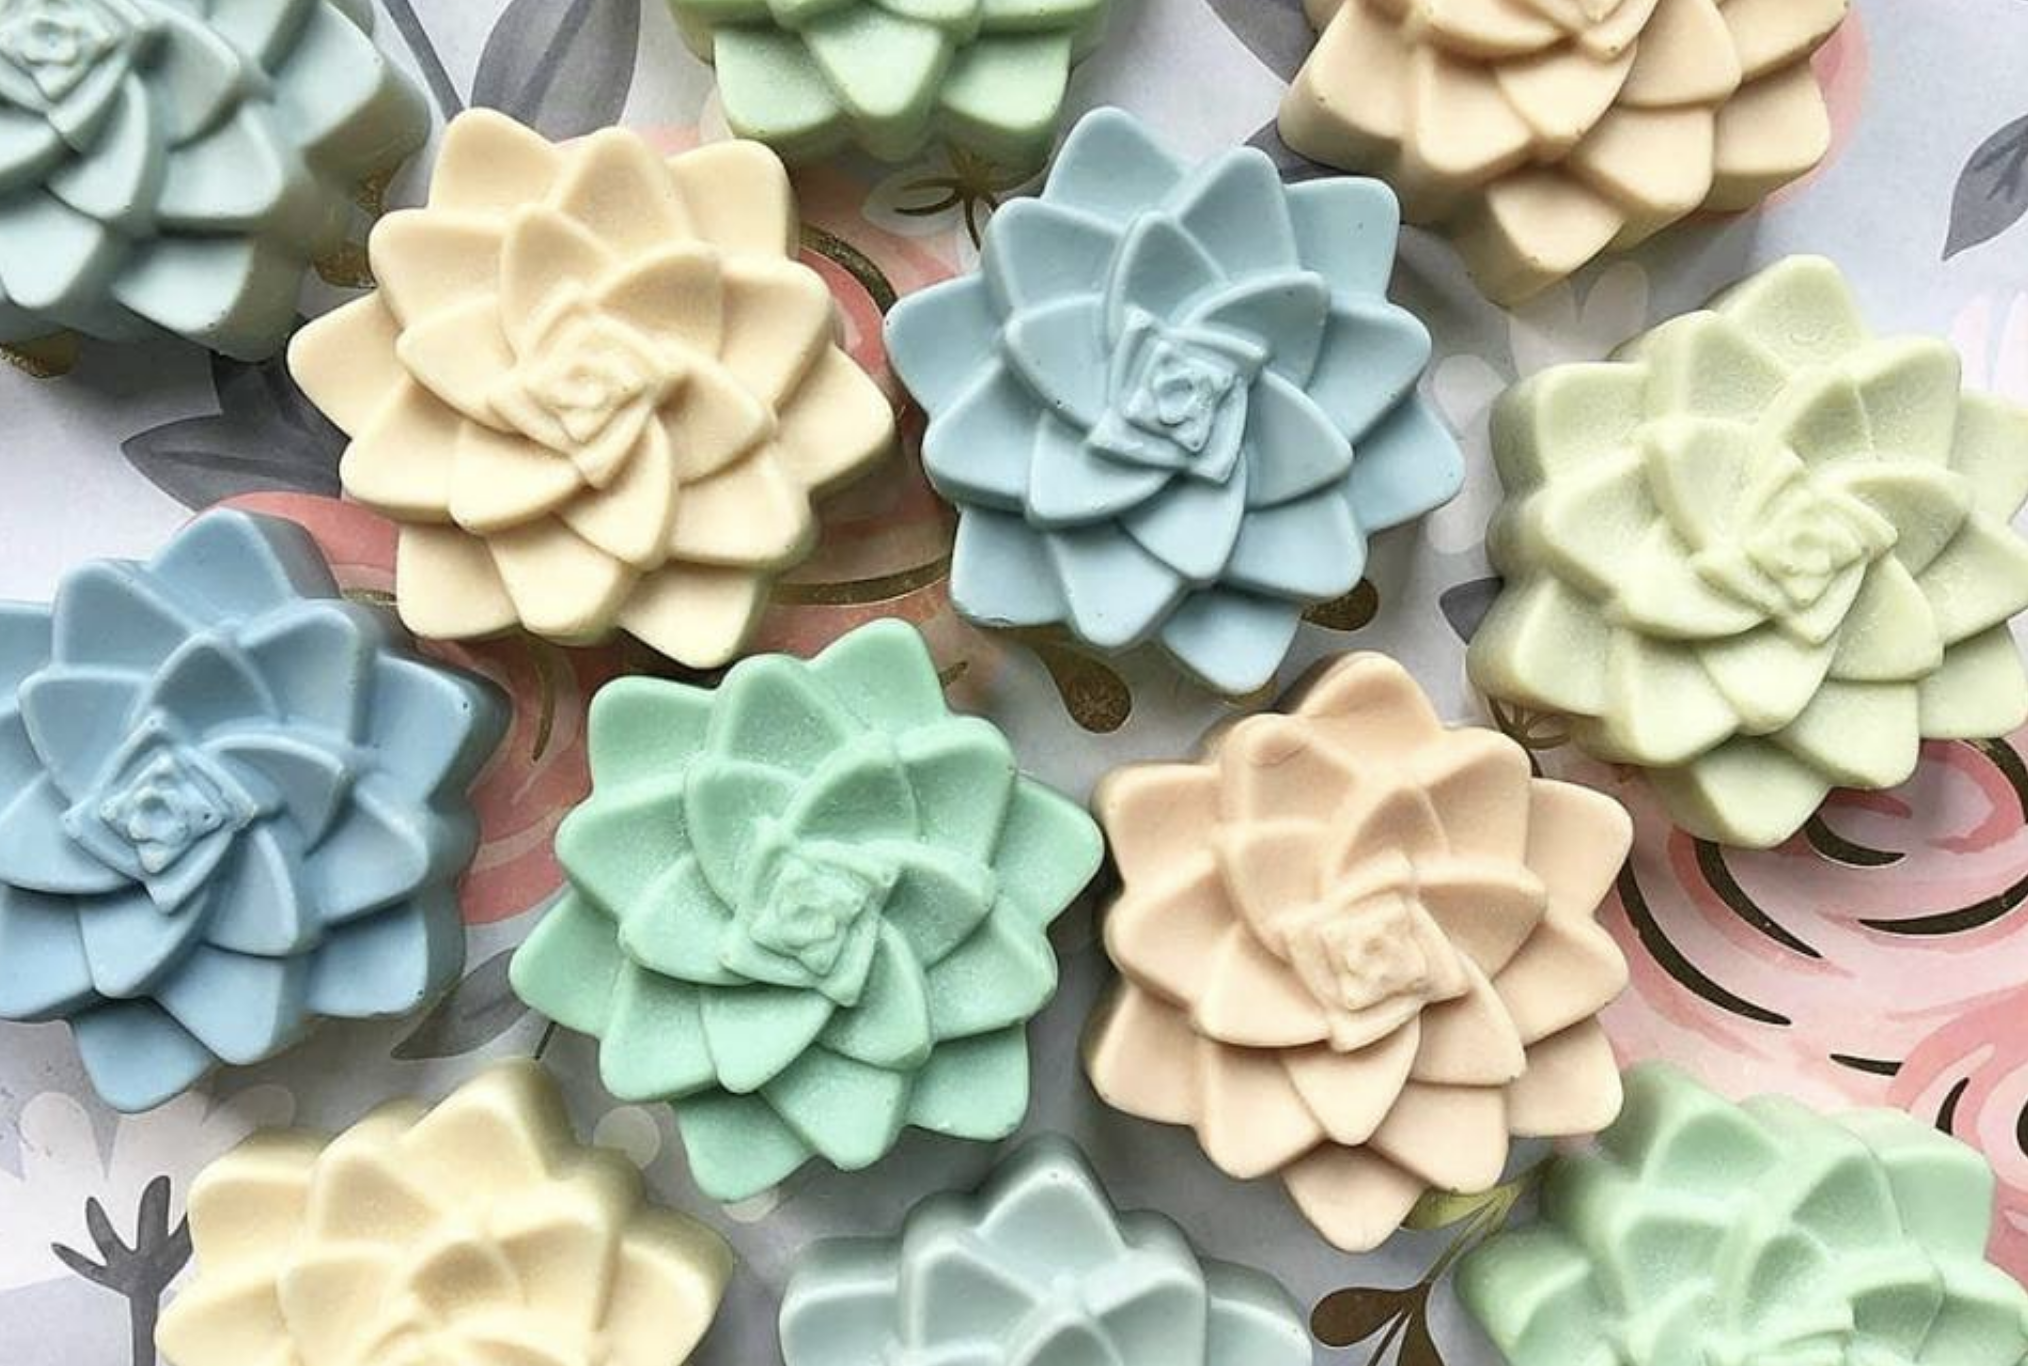 Soap Making Classes And Workshops In Singapore